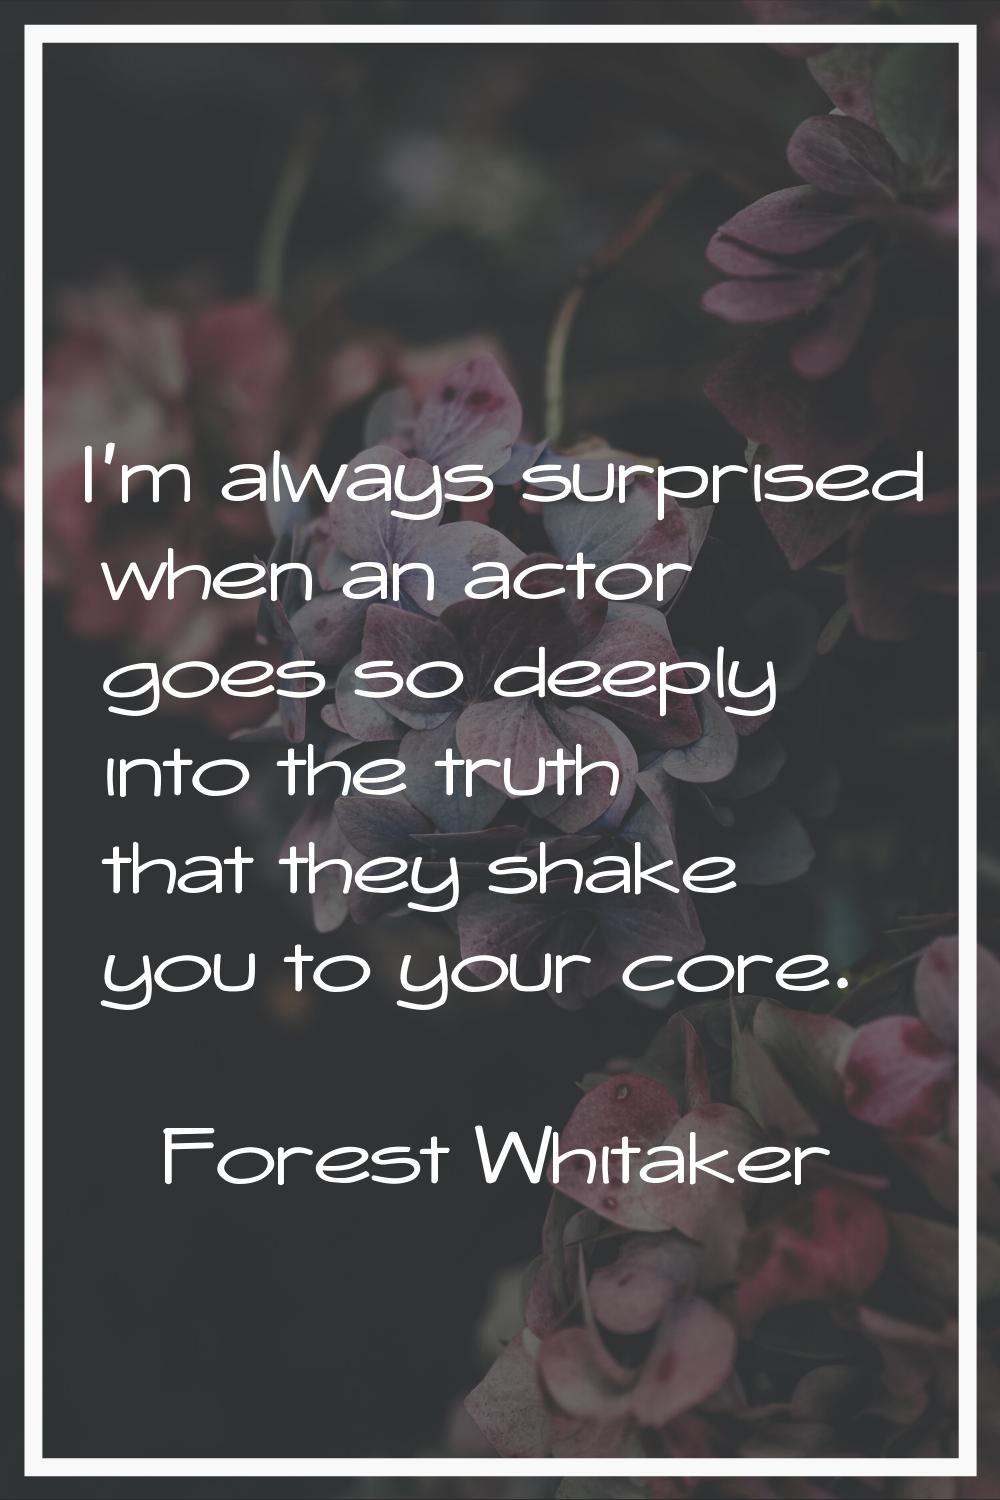 I'm always surprised when an actor goes so deeply into the truth that they shake you to your core.